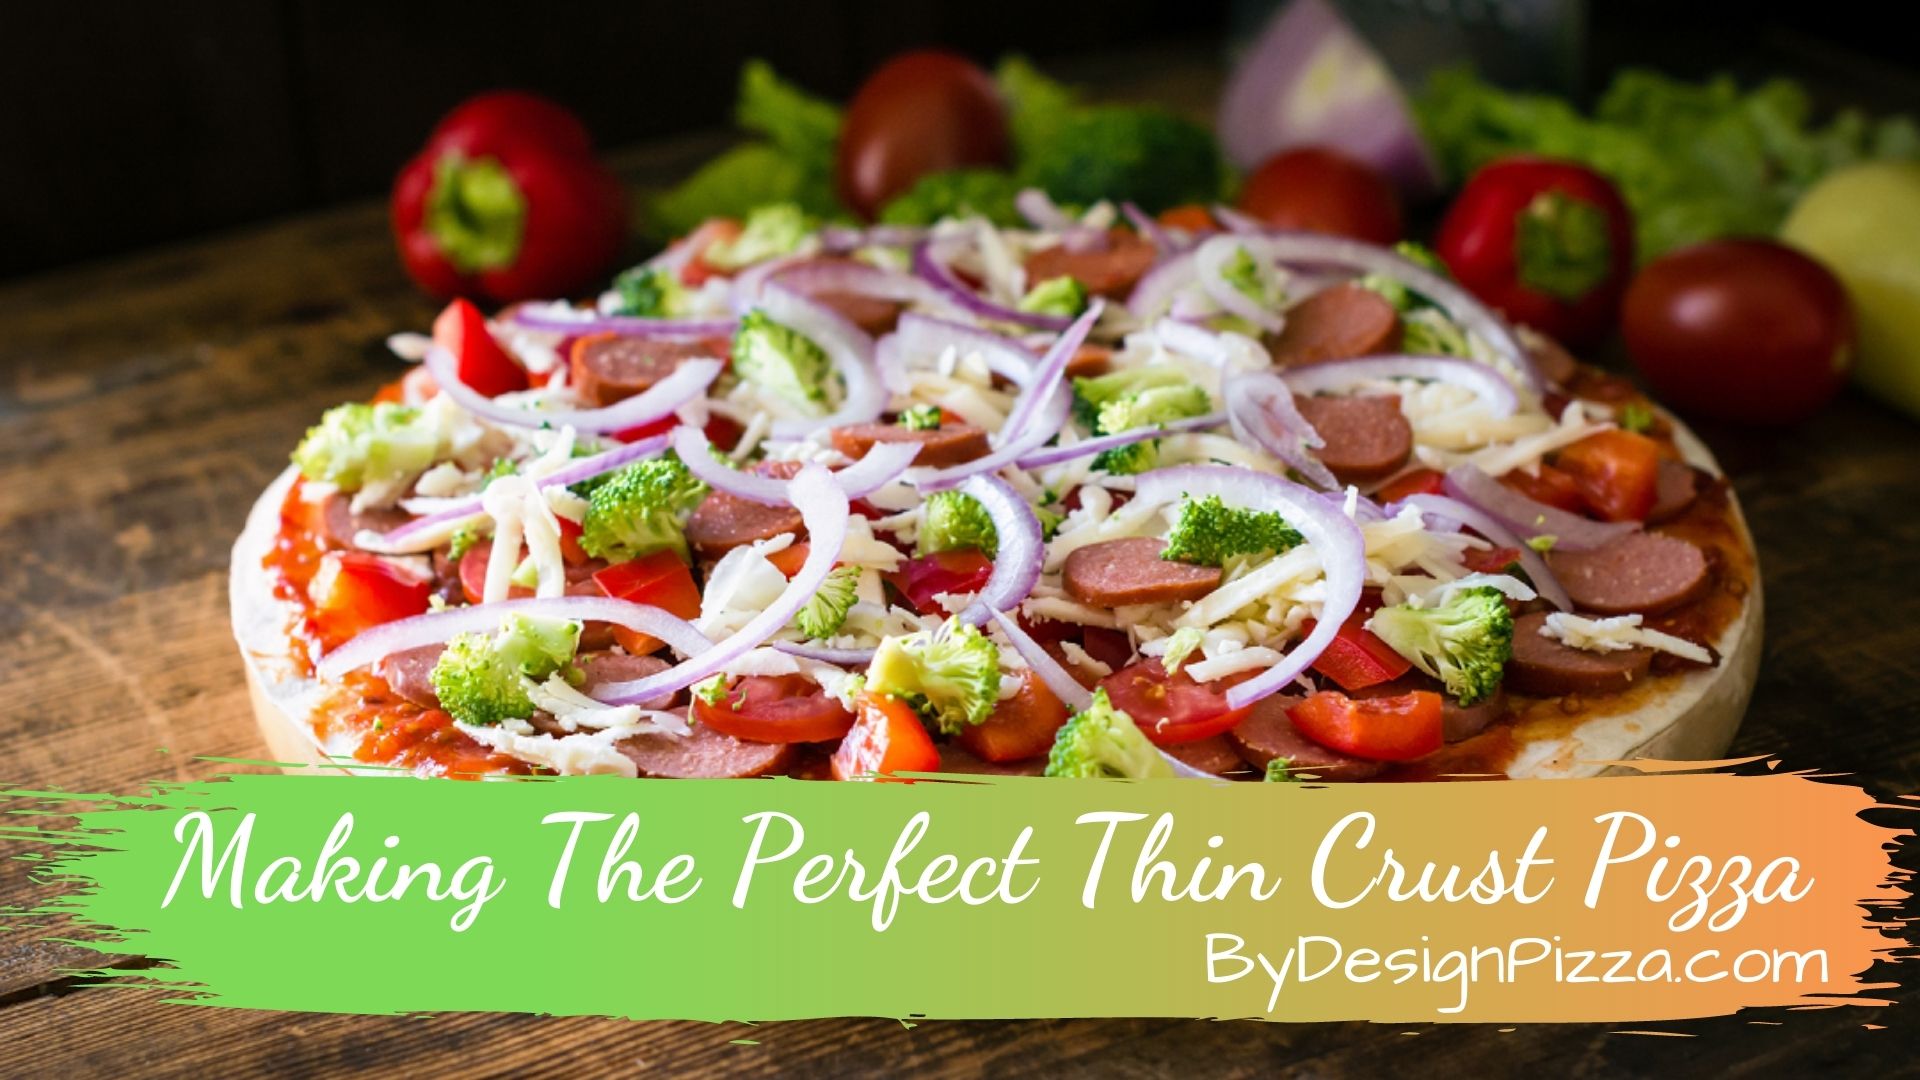 Making The Perfect Thin Crust Pizza